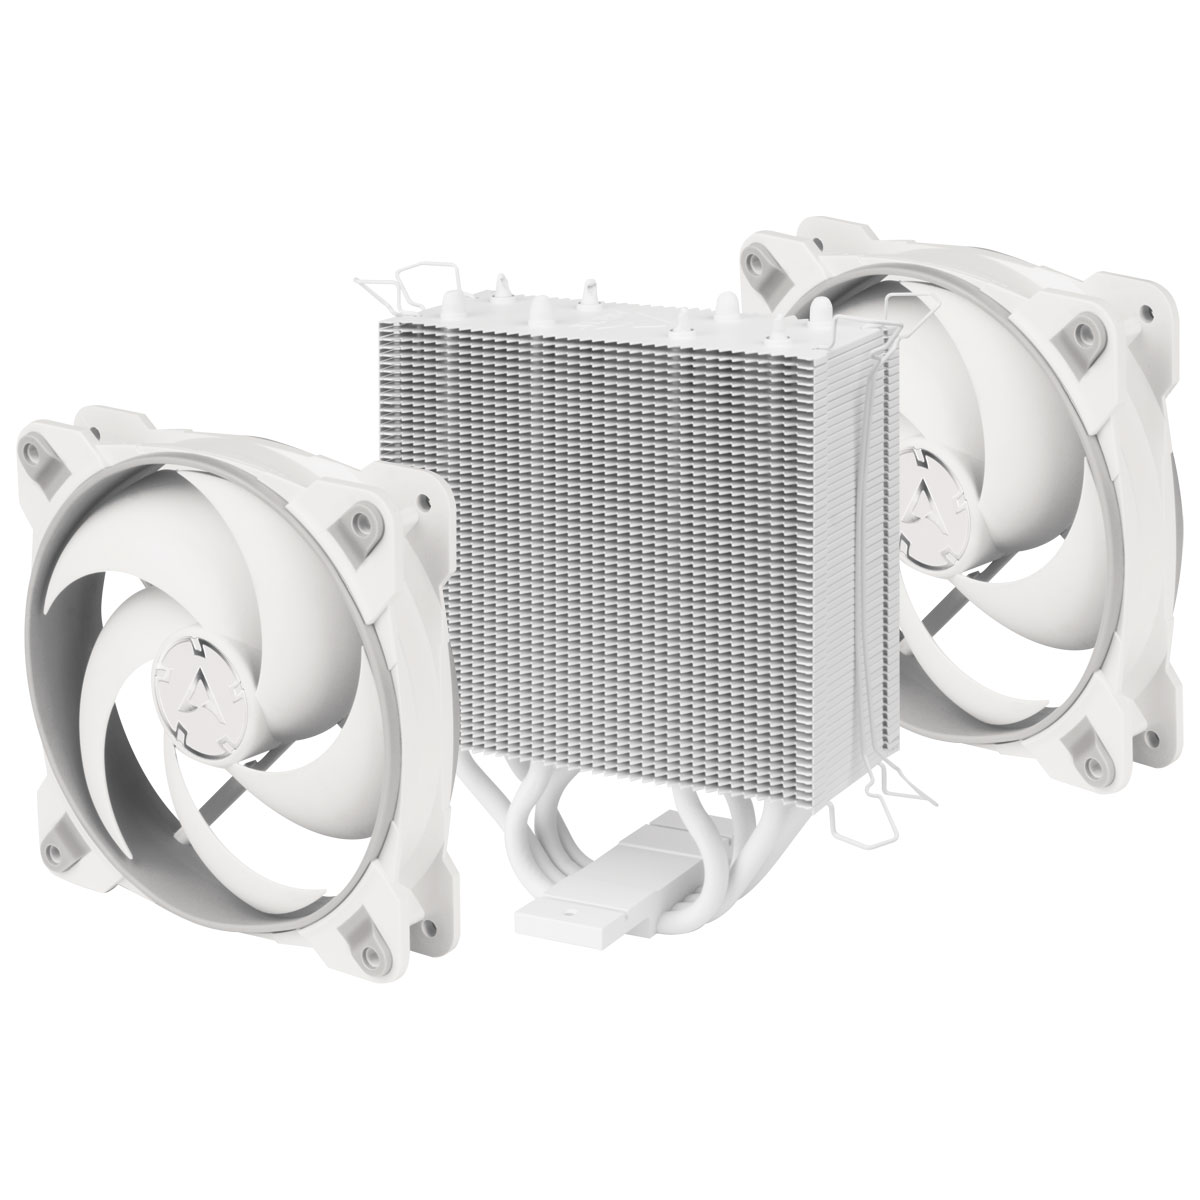 Freezer 34 eSports DUO-Grey/White,CPU Cooler with BioniX,P-Series Fans,LGA1700 Kit included